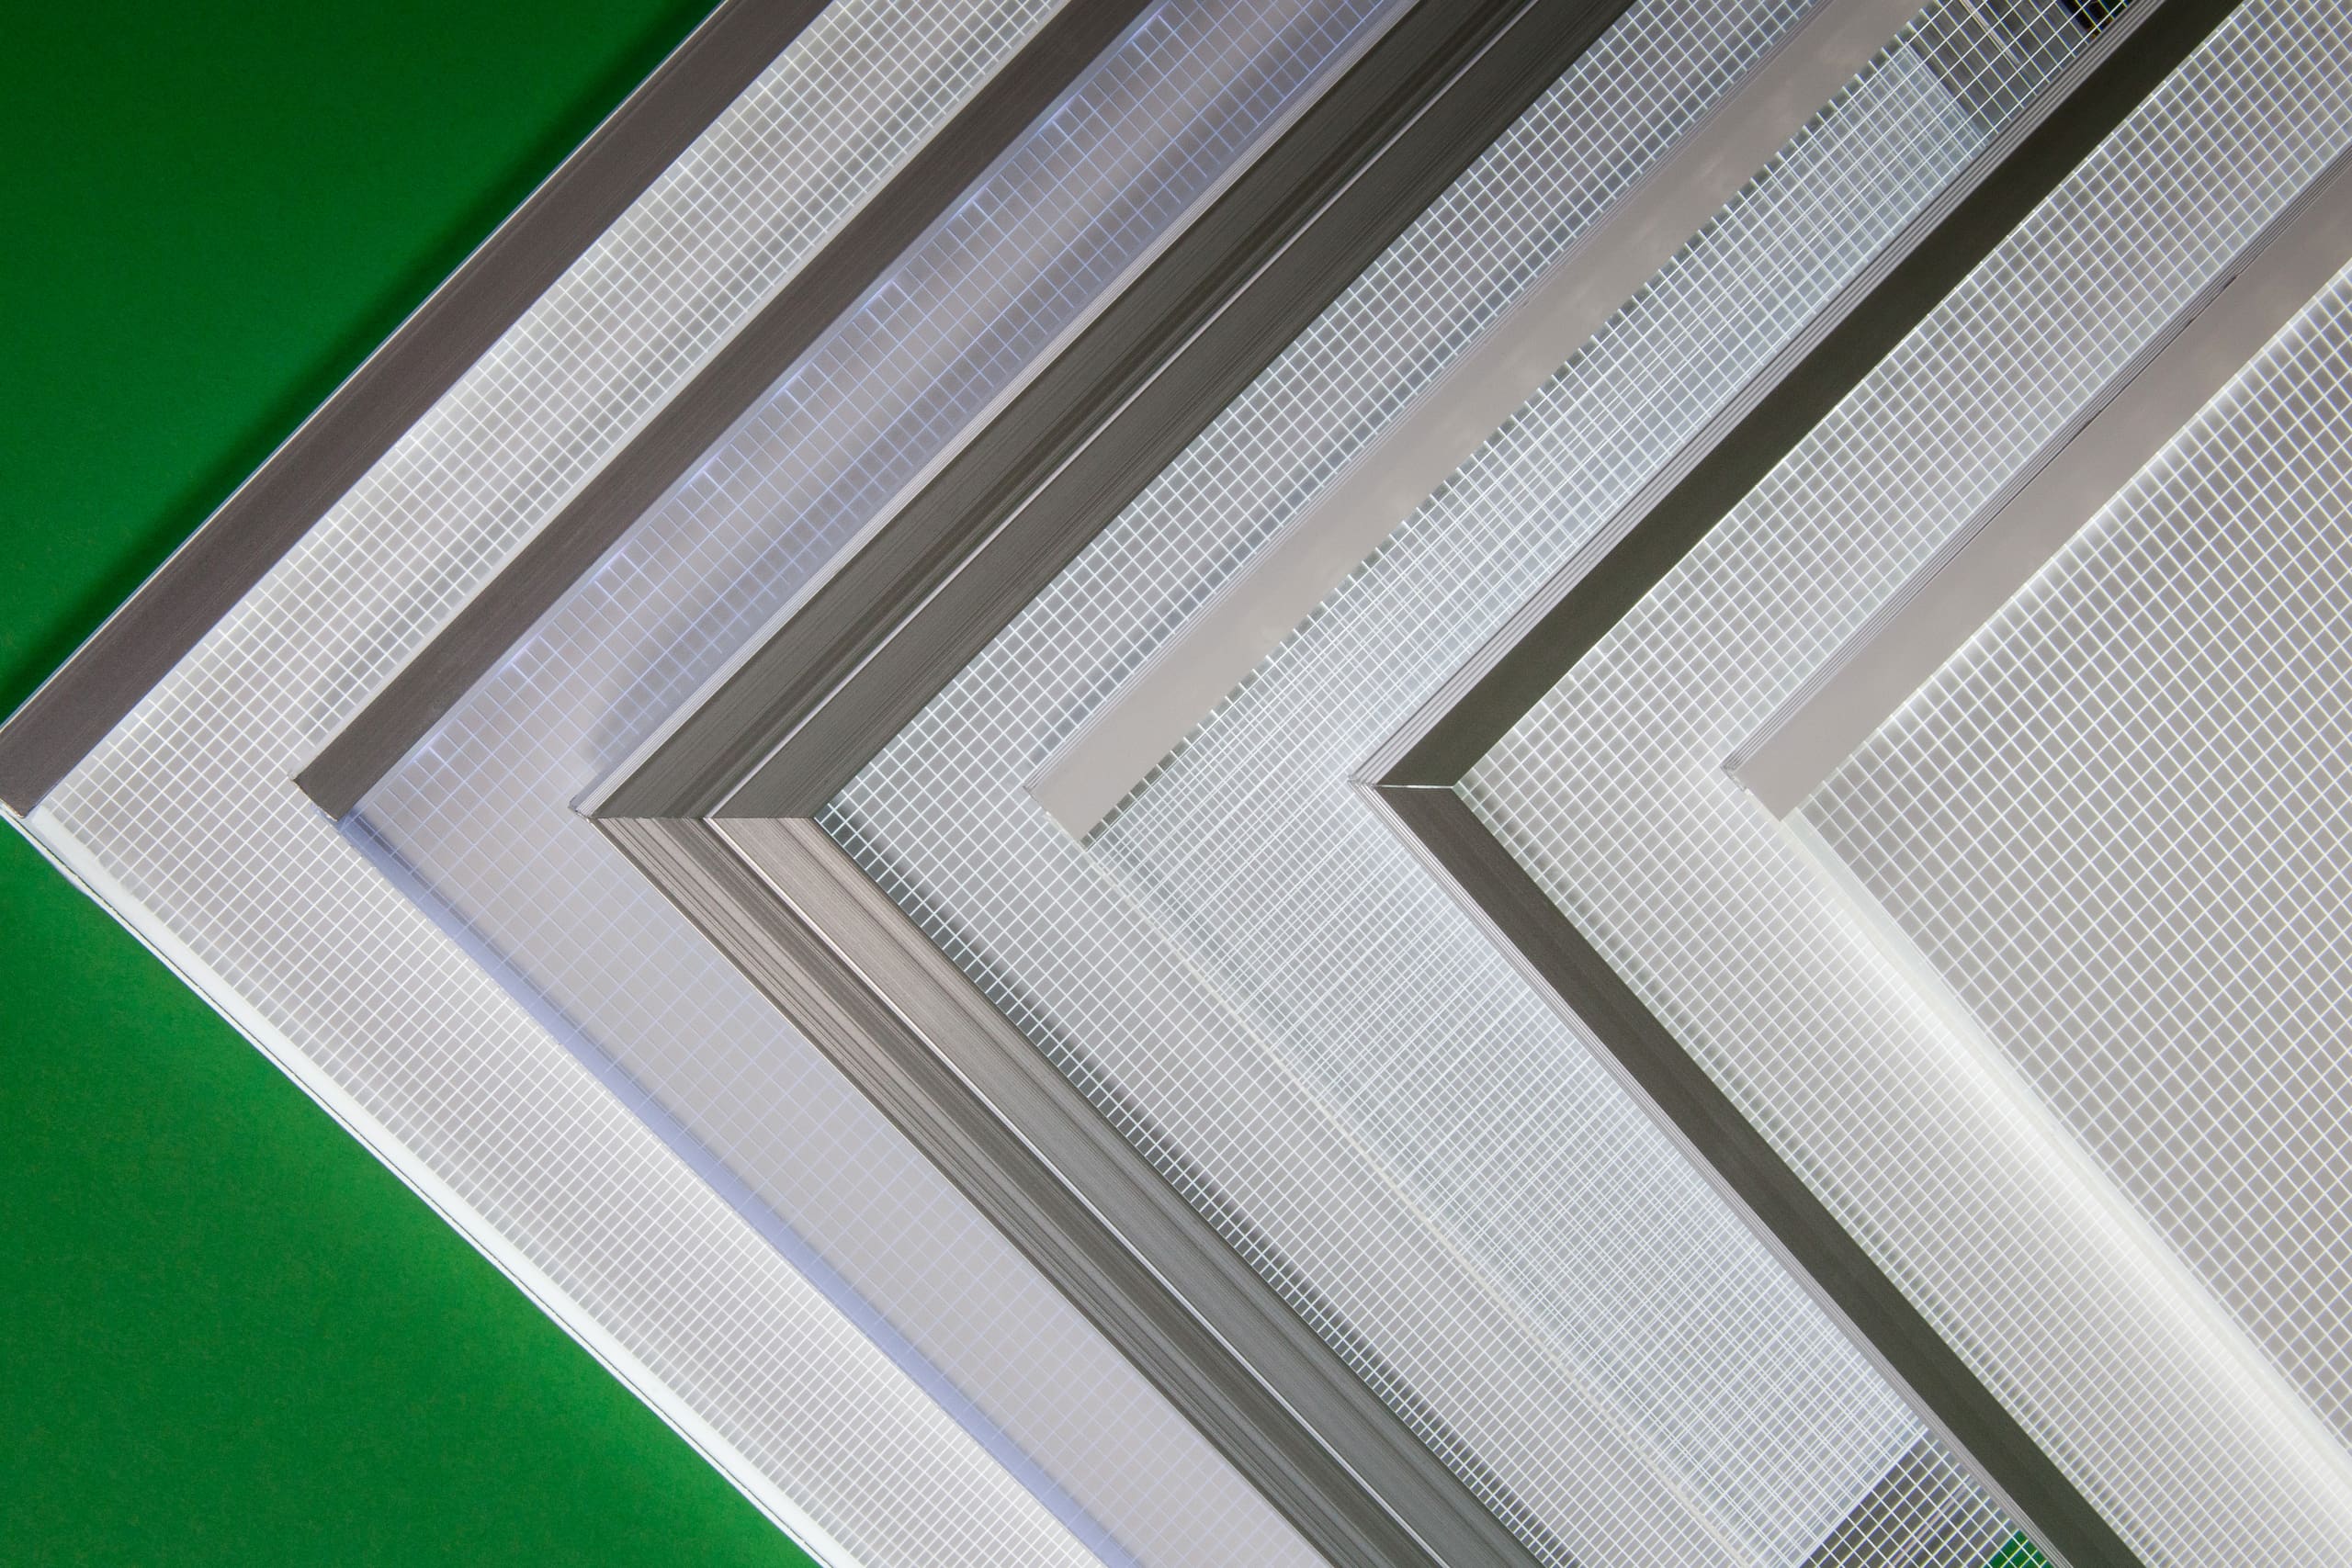 A diagonal arrangement of multiple window screens with varying mesh sizes and frame materials set against a green background features an integrated LED Light Sheet. The screens overlap slightly, showing a comparison of their different build attributes.